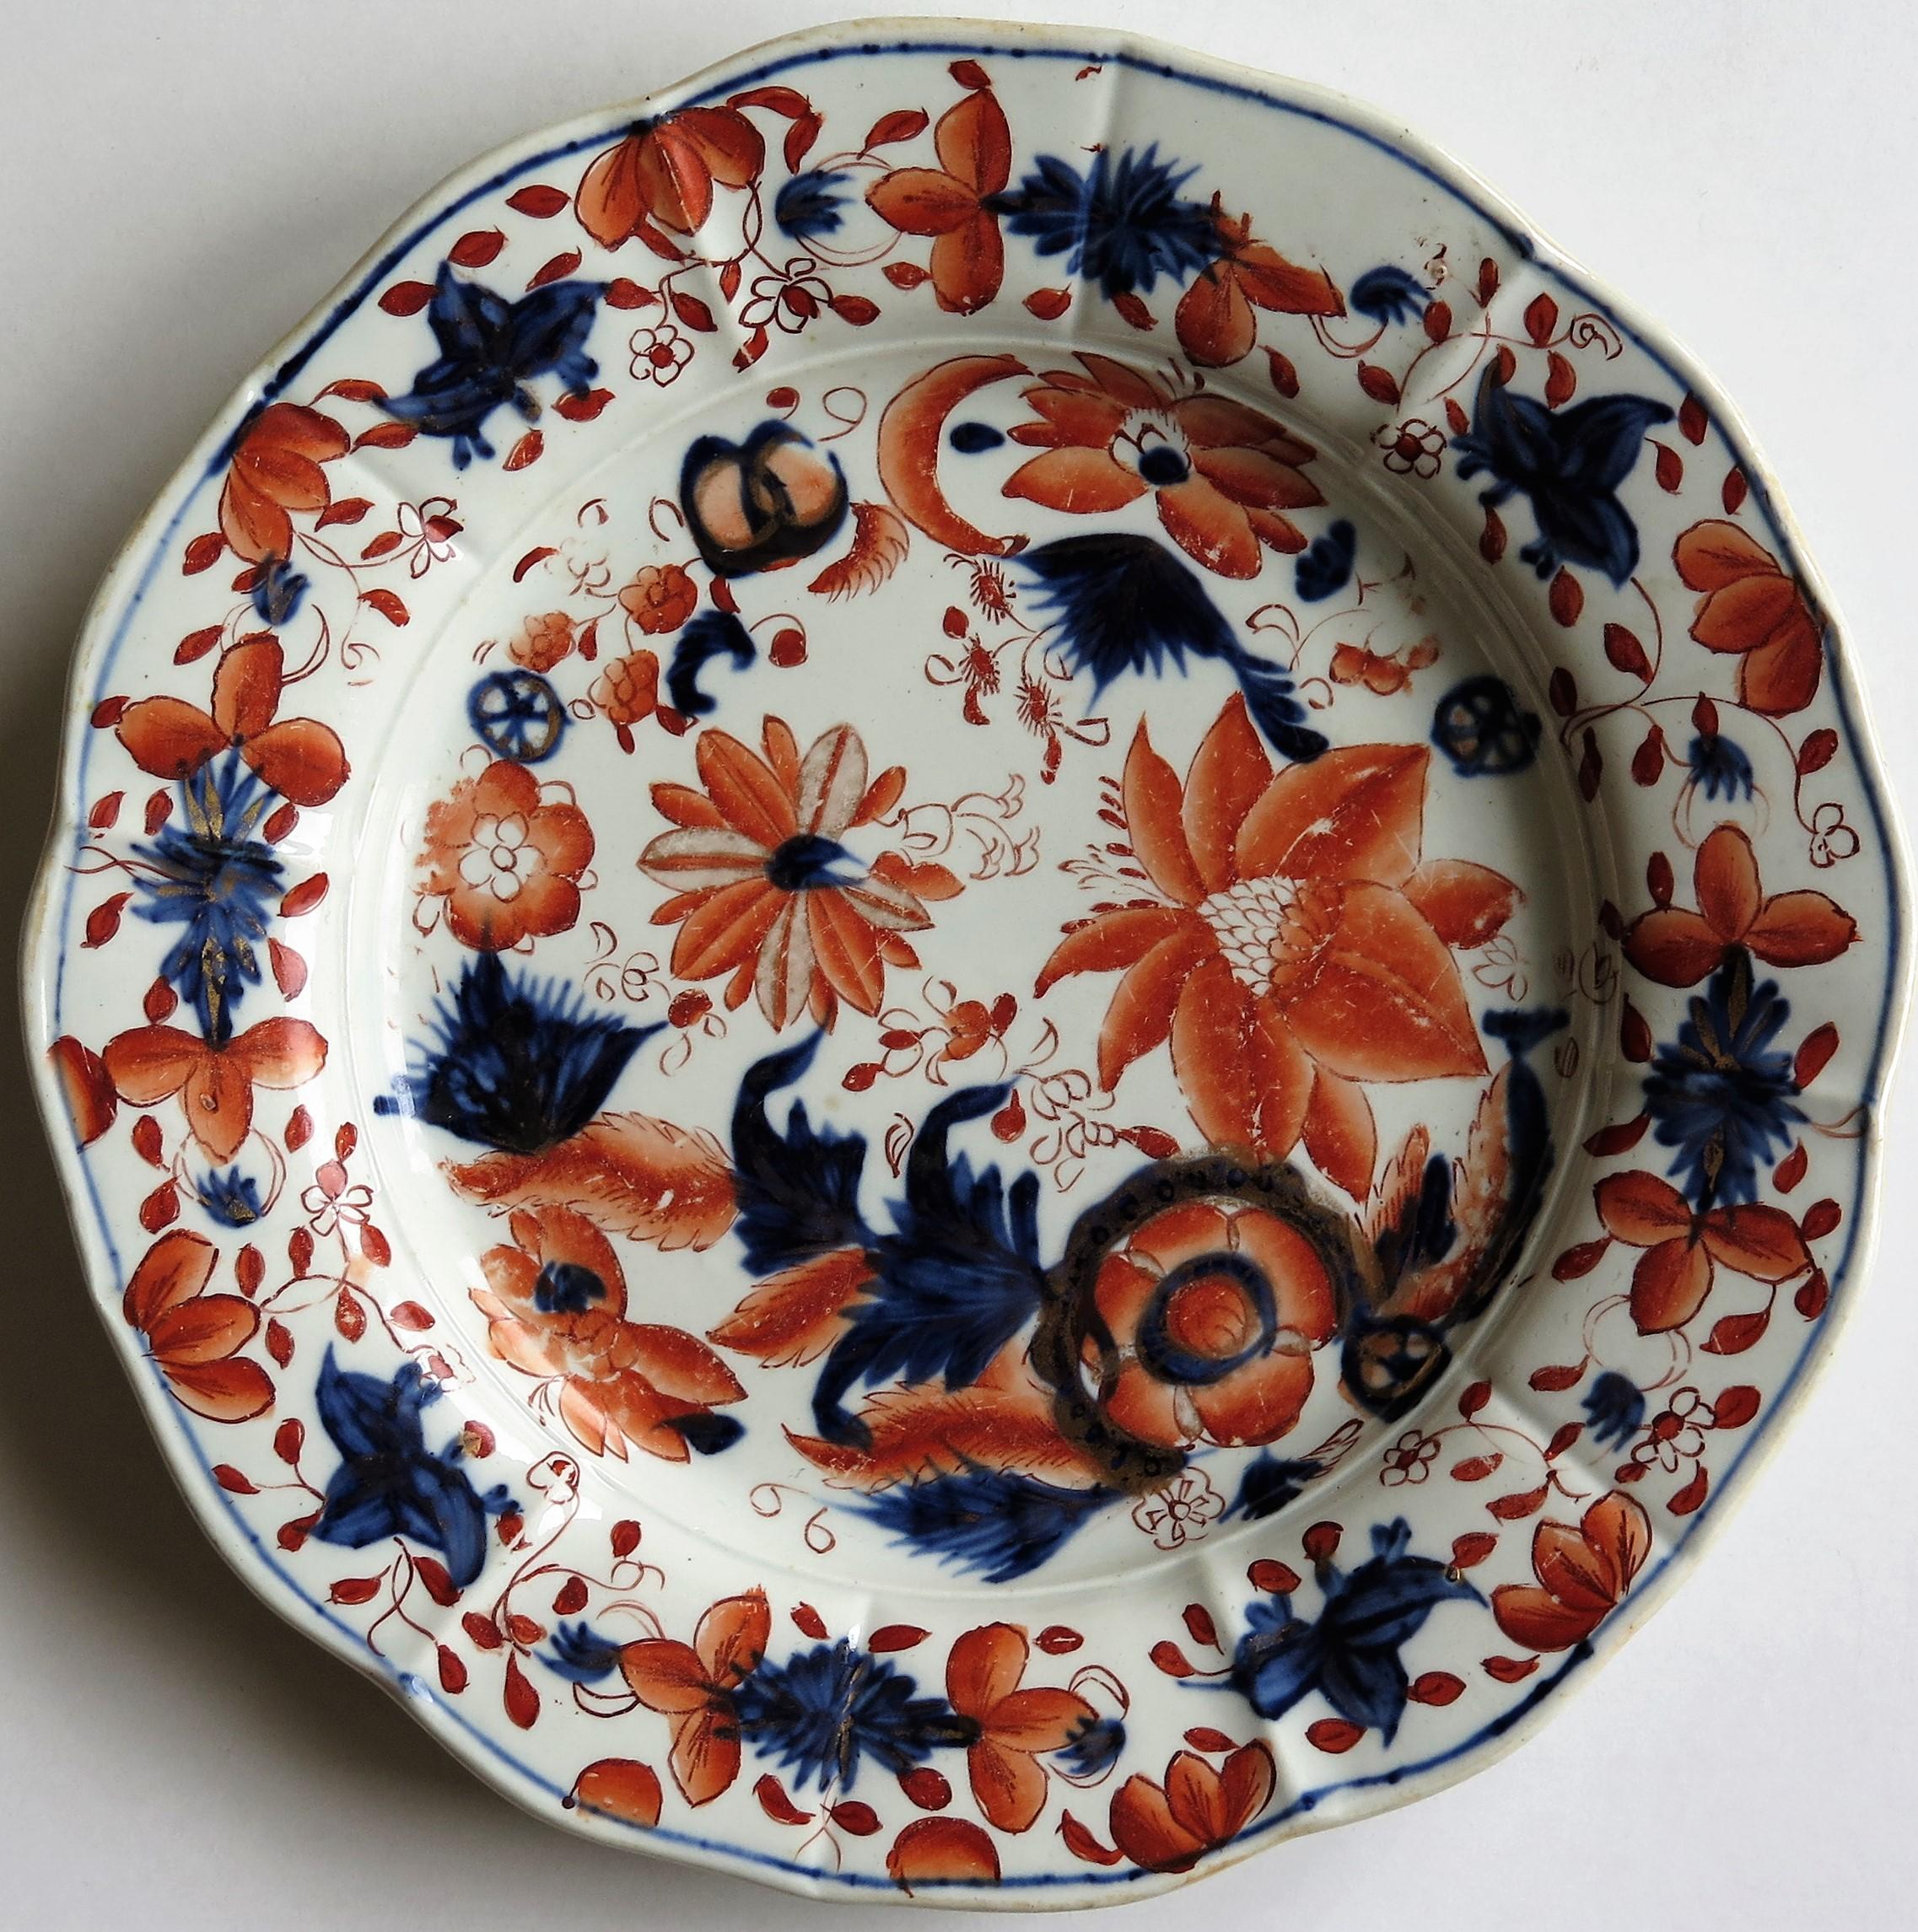 This is a good decorative Ironstone pottery desert plate or dish produced by the Mason's Factory at Lane Delph, Staffordshire, England, circa 1815.

The plate is circular with radial ribs and a lobed rim.

This desert plate is beautifully decorated